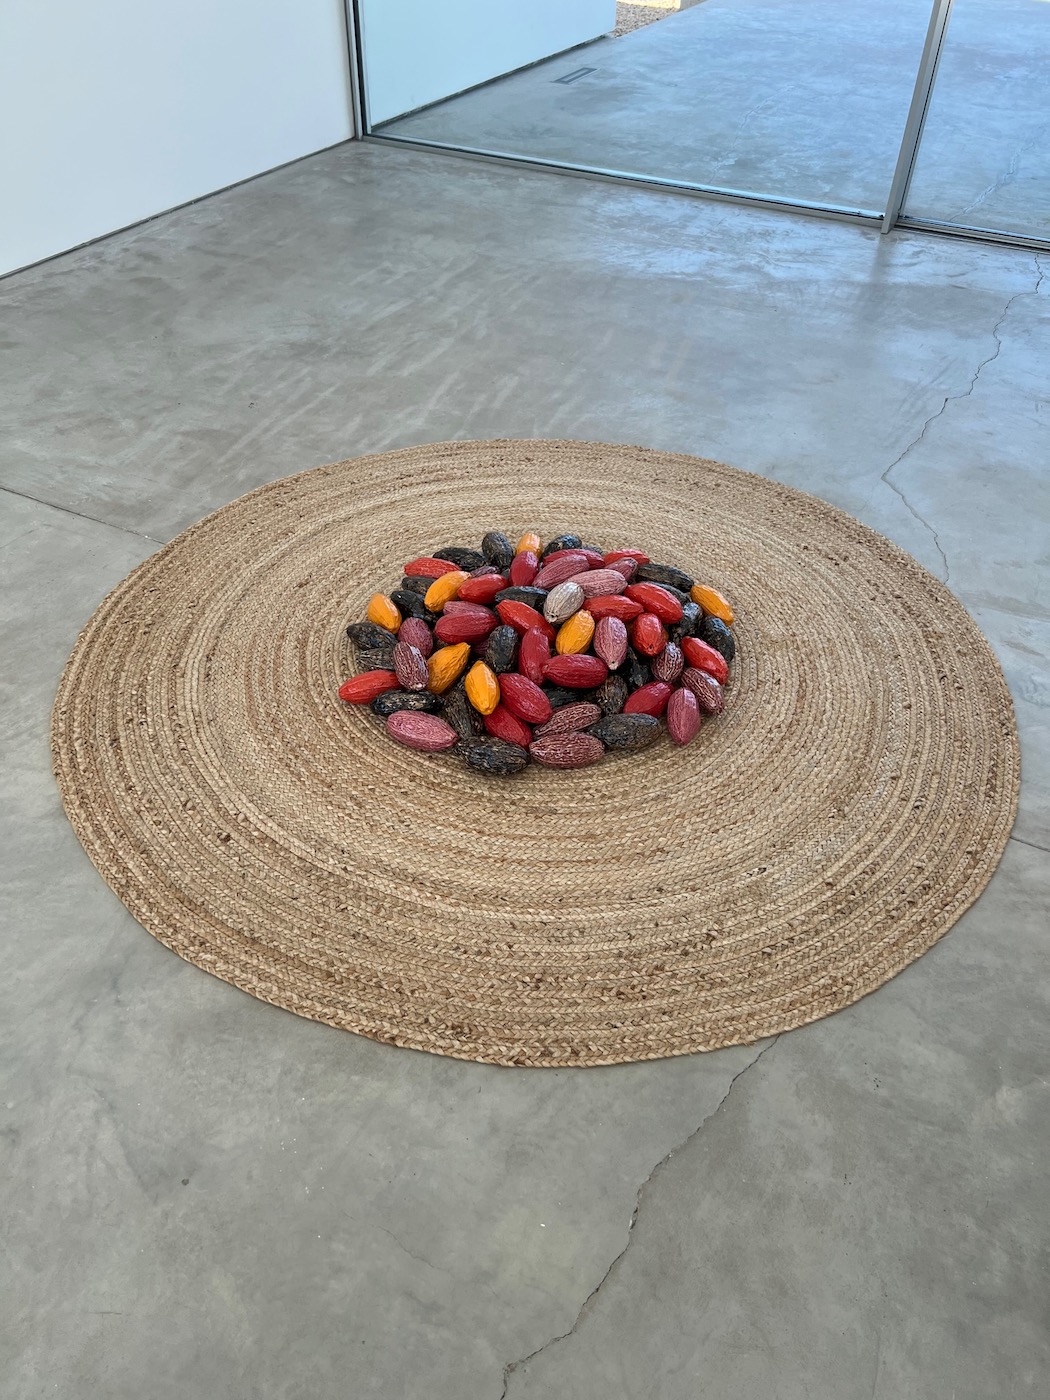 Veronica Ryan, Cocoa Passion in Tandem, 2021. Installation view at Sharjah Biennial 15. Photo: C&.